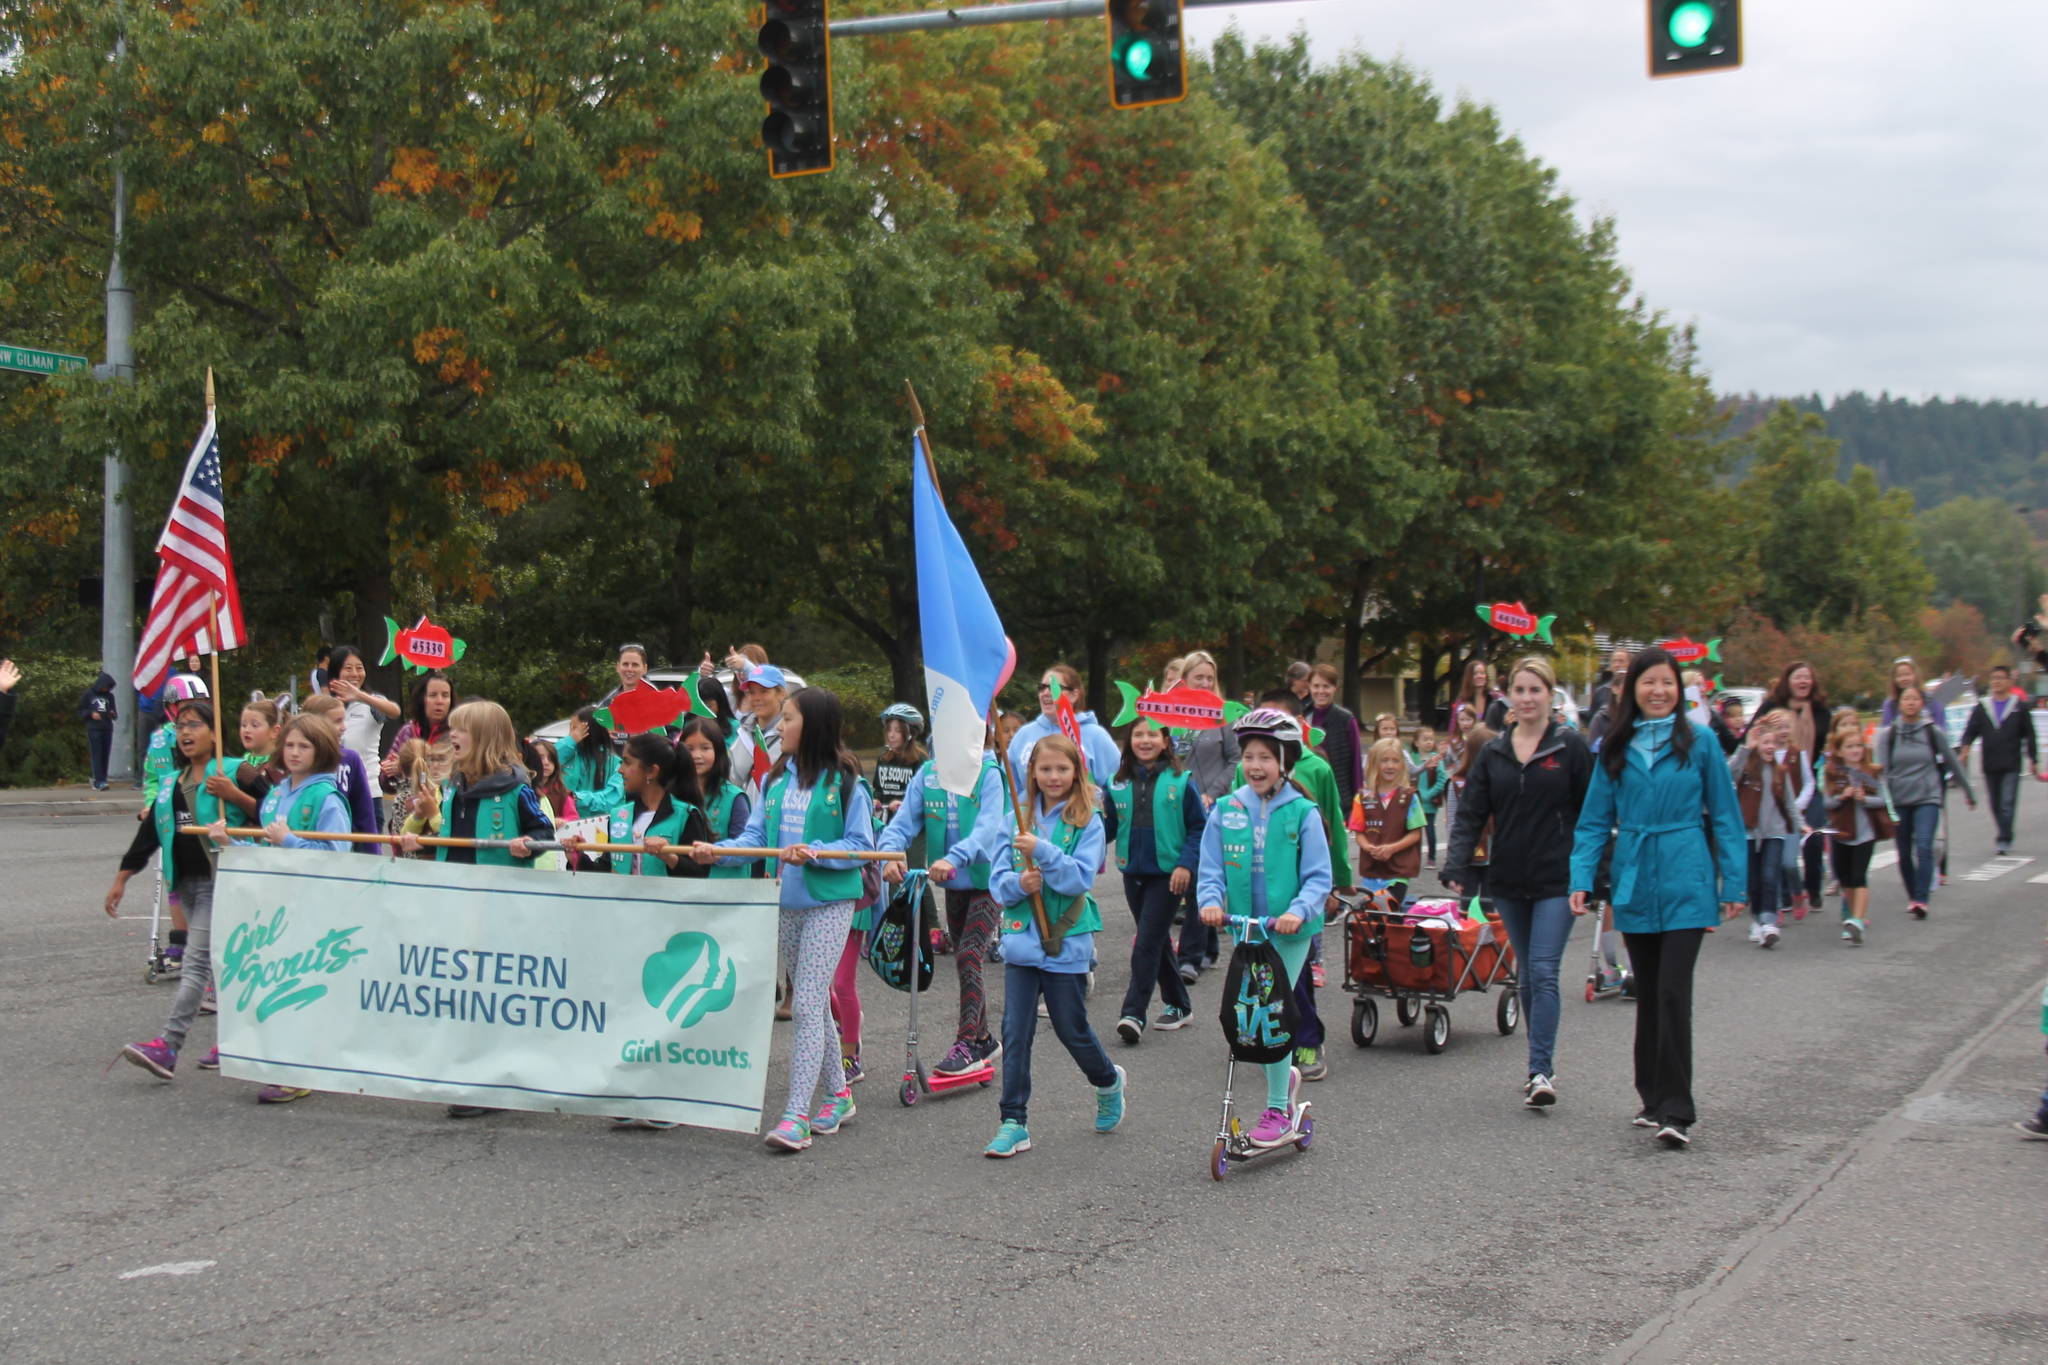 New inclusive Girl Scouts troop welcomes girls of all abilities